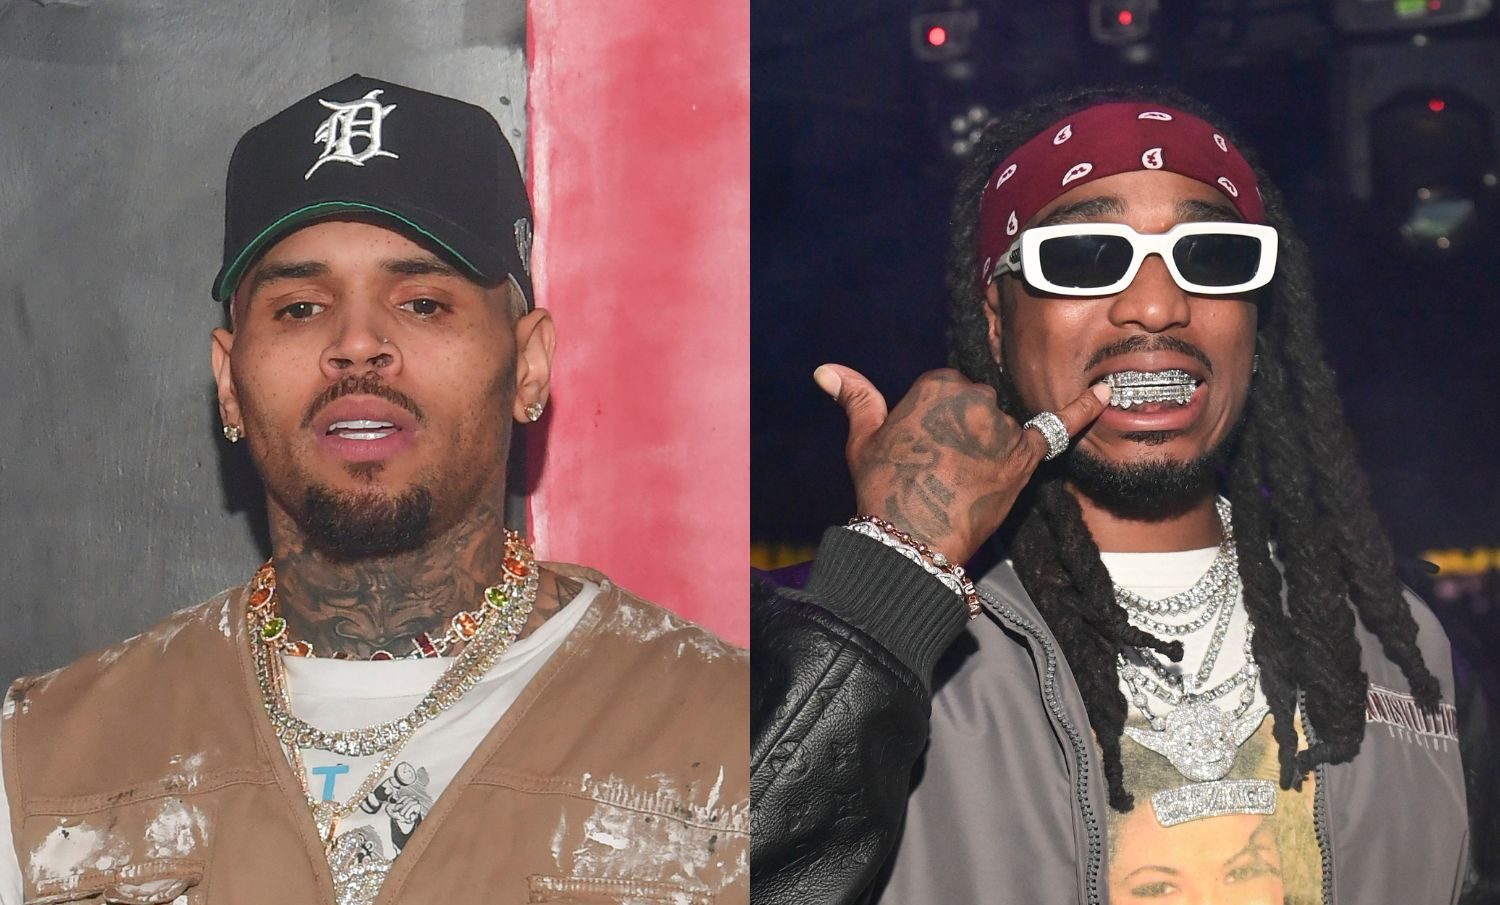 Chile! Chris Brown Goes IN On Quavo In New Diss Track ‘Weakest Link’ (LISTEN) thumbnail